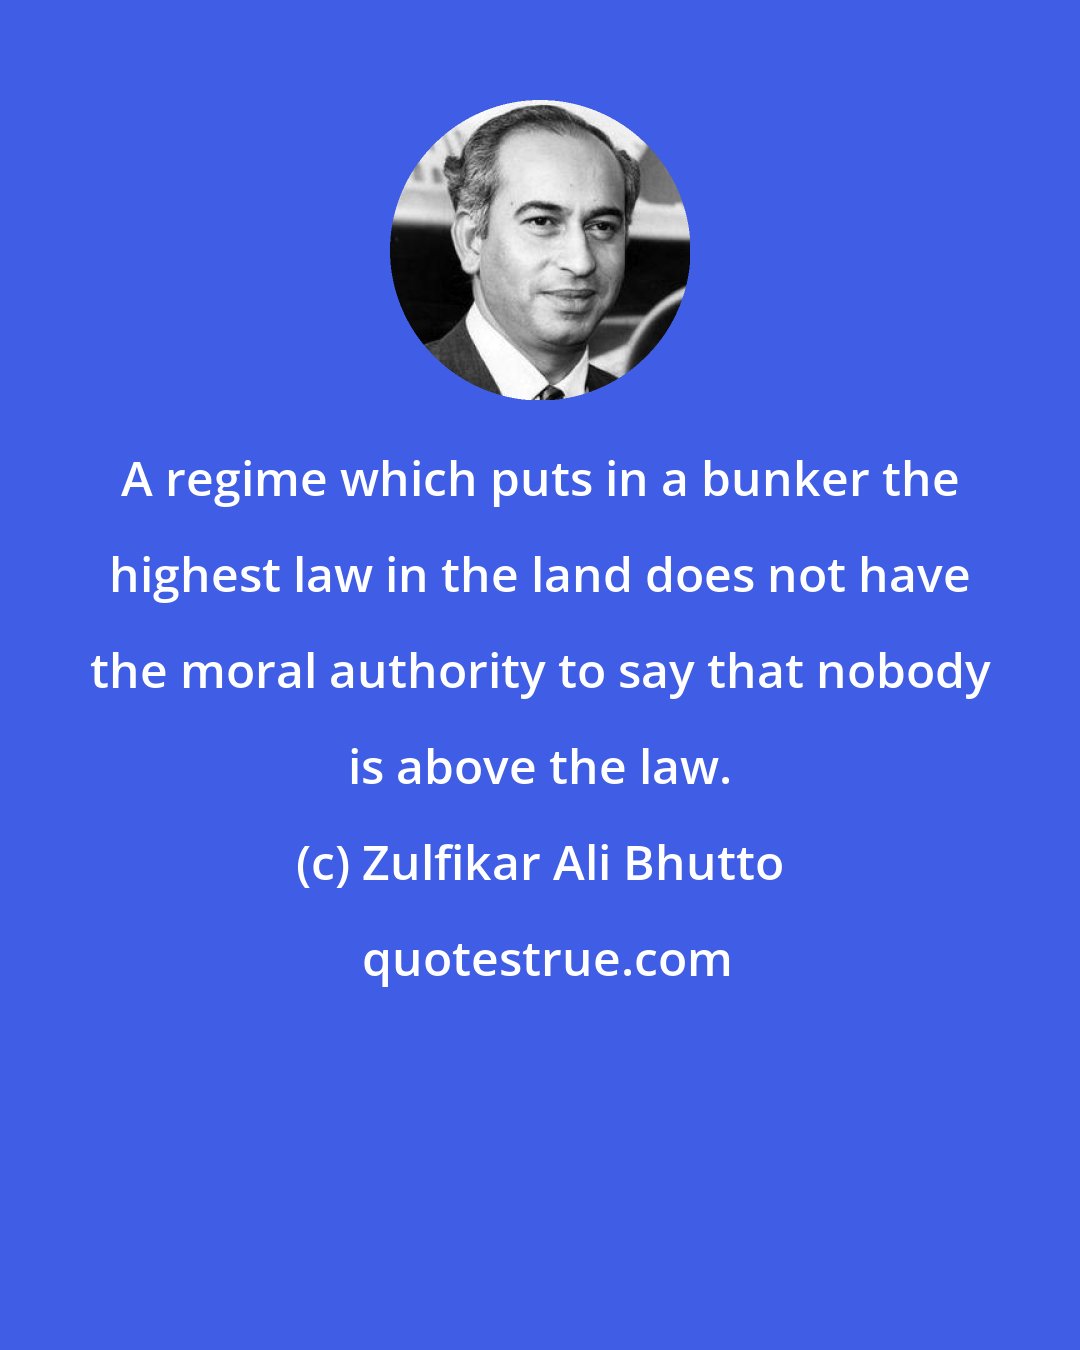 Zulfikar Ali Bhutto: A regime which puts in a bunker the highest law in the land does not have the moral authority to say that nobody is above the law.